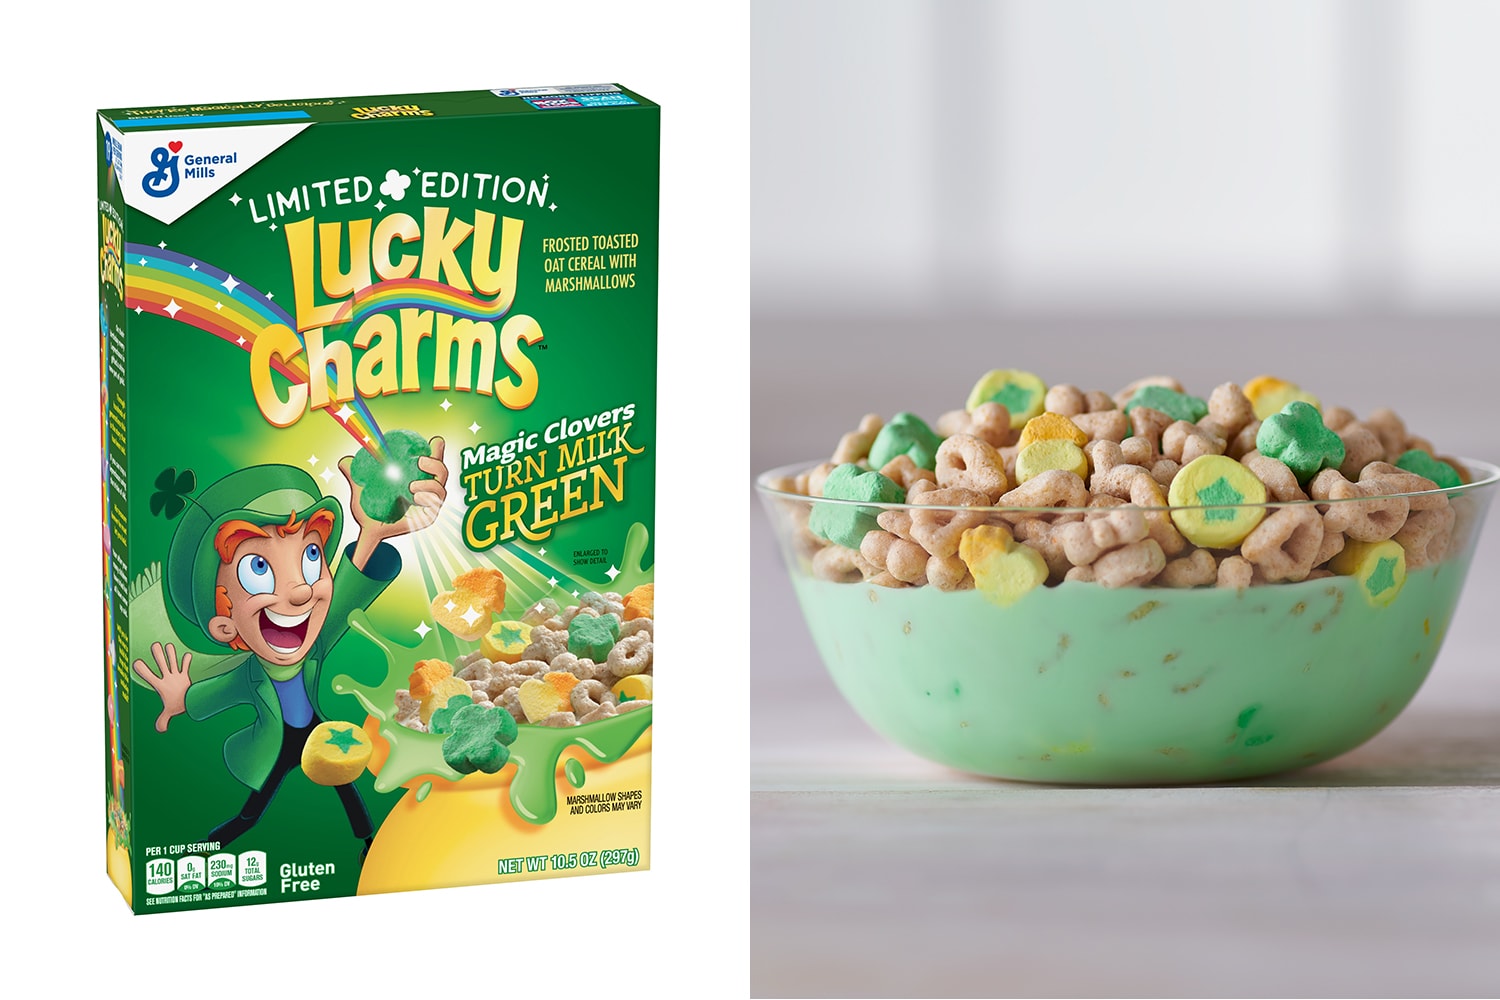 Turn Milk Green Lucky Charms St. Patrick’s Day Release Crocs Candy Land Cold Stone Creamery Info Hasbro CharmWorld Candy Land Info